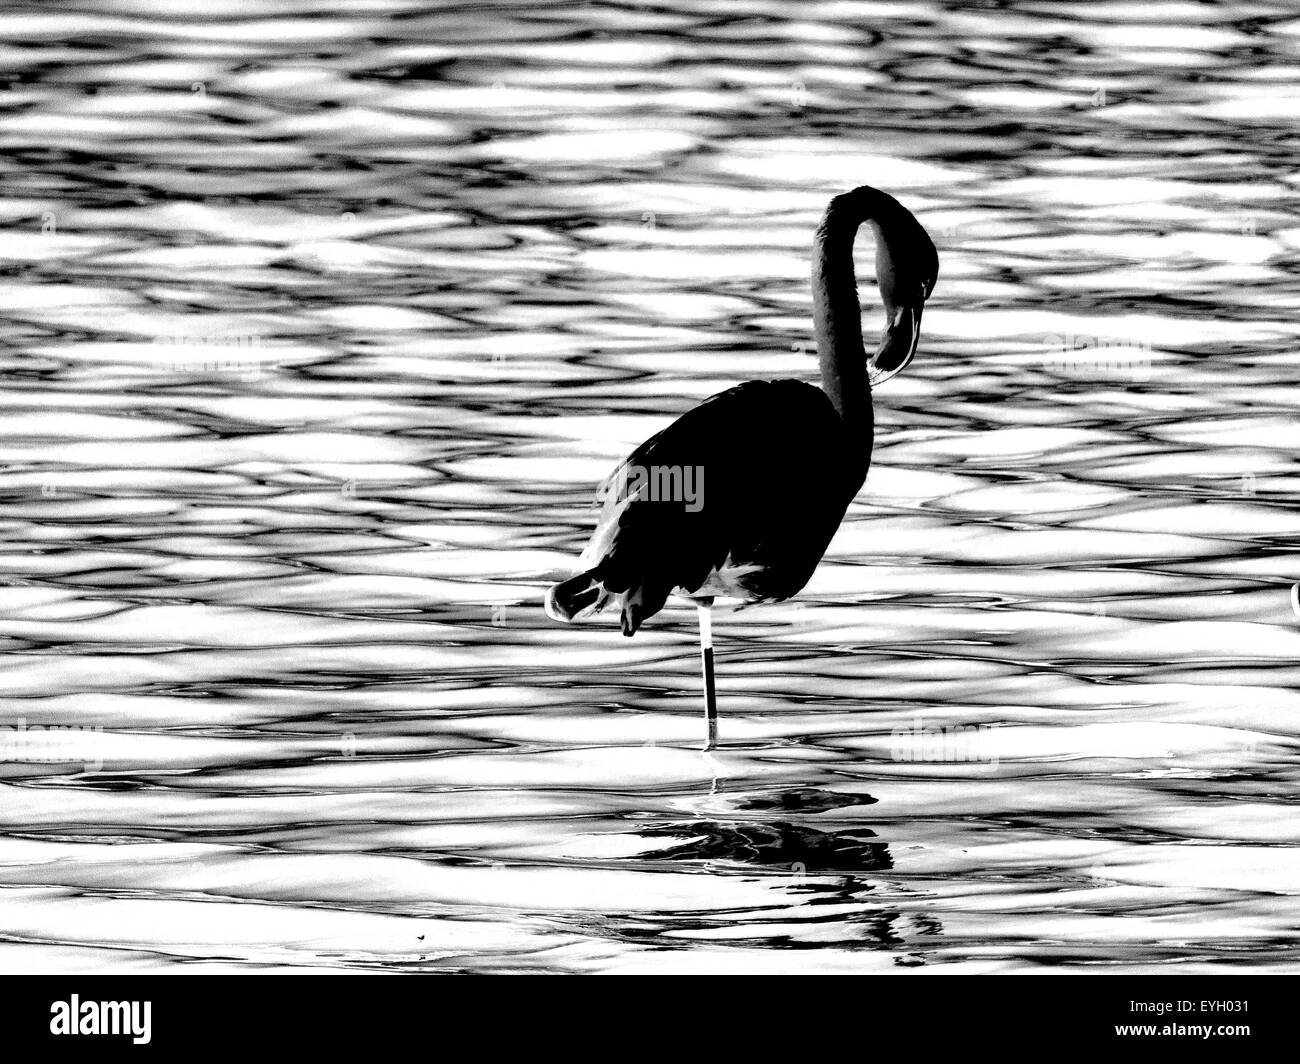 Flamingo silhouette in a water background, in black and white Stock Photo